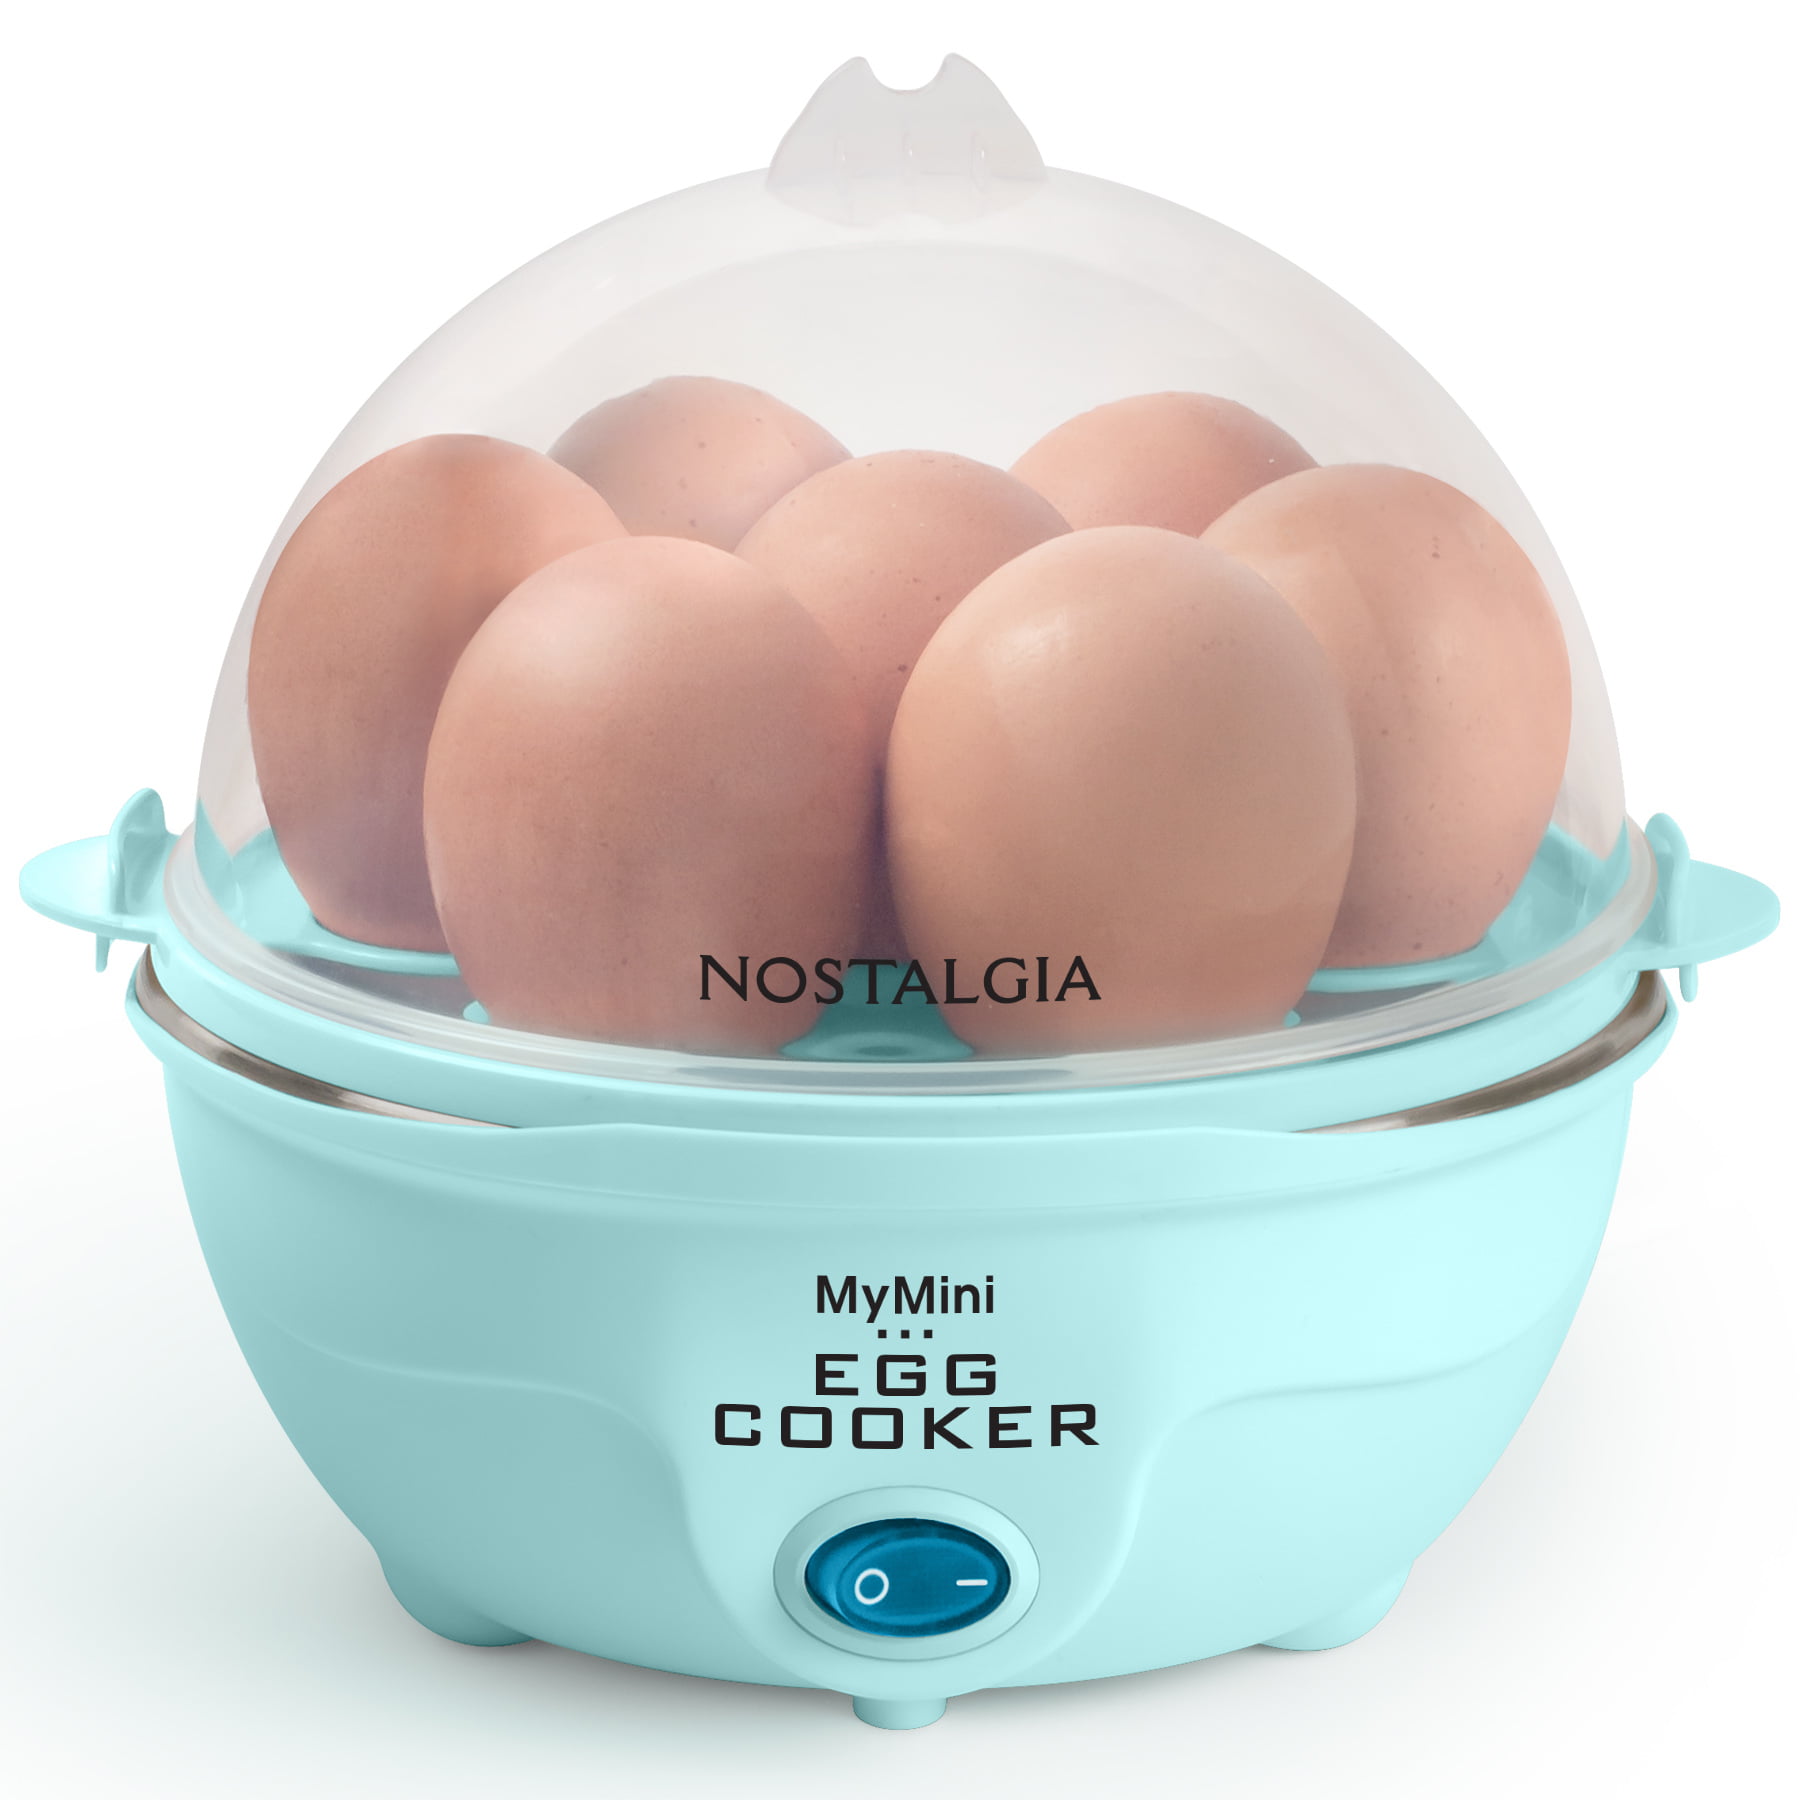 electric boiled egg cooker